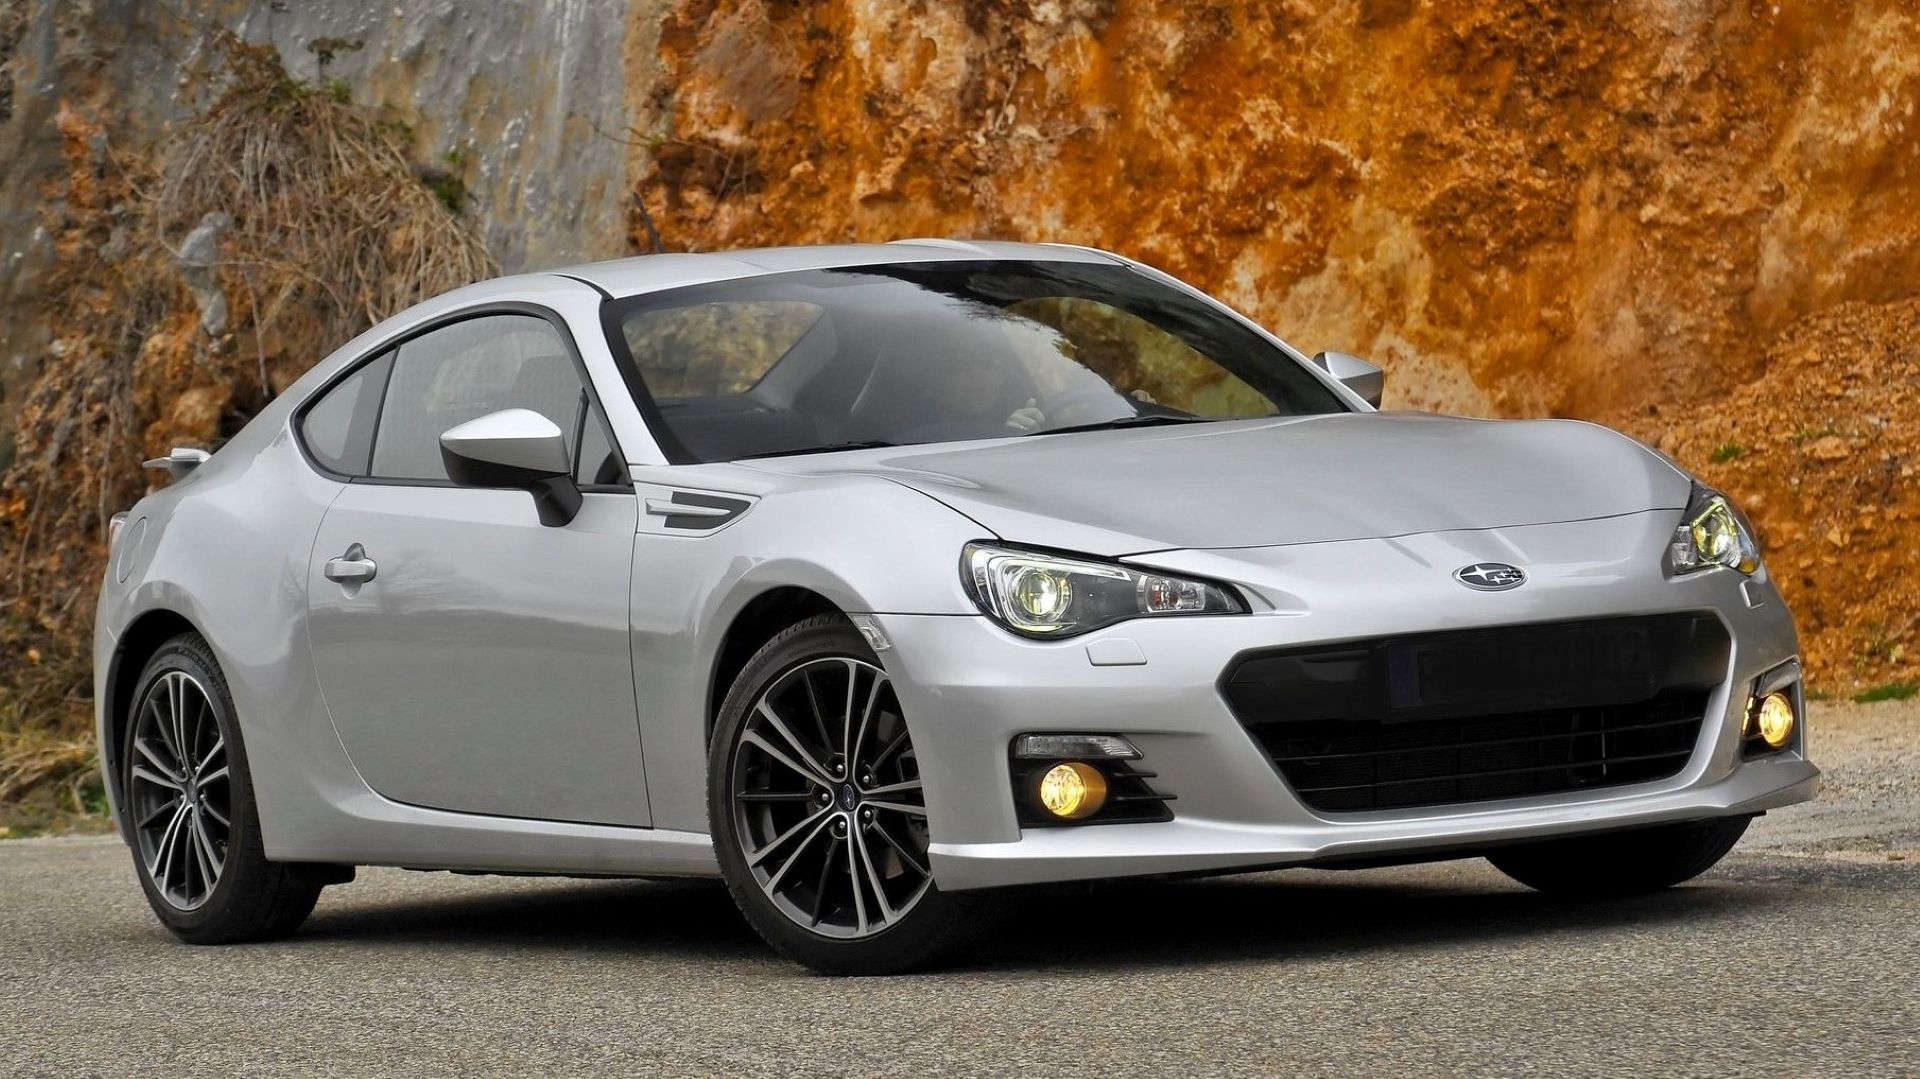 Front 3/4 shot of a parked 2013 Subaru BRZ